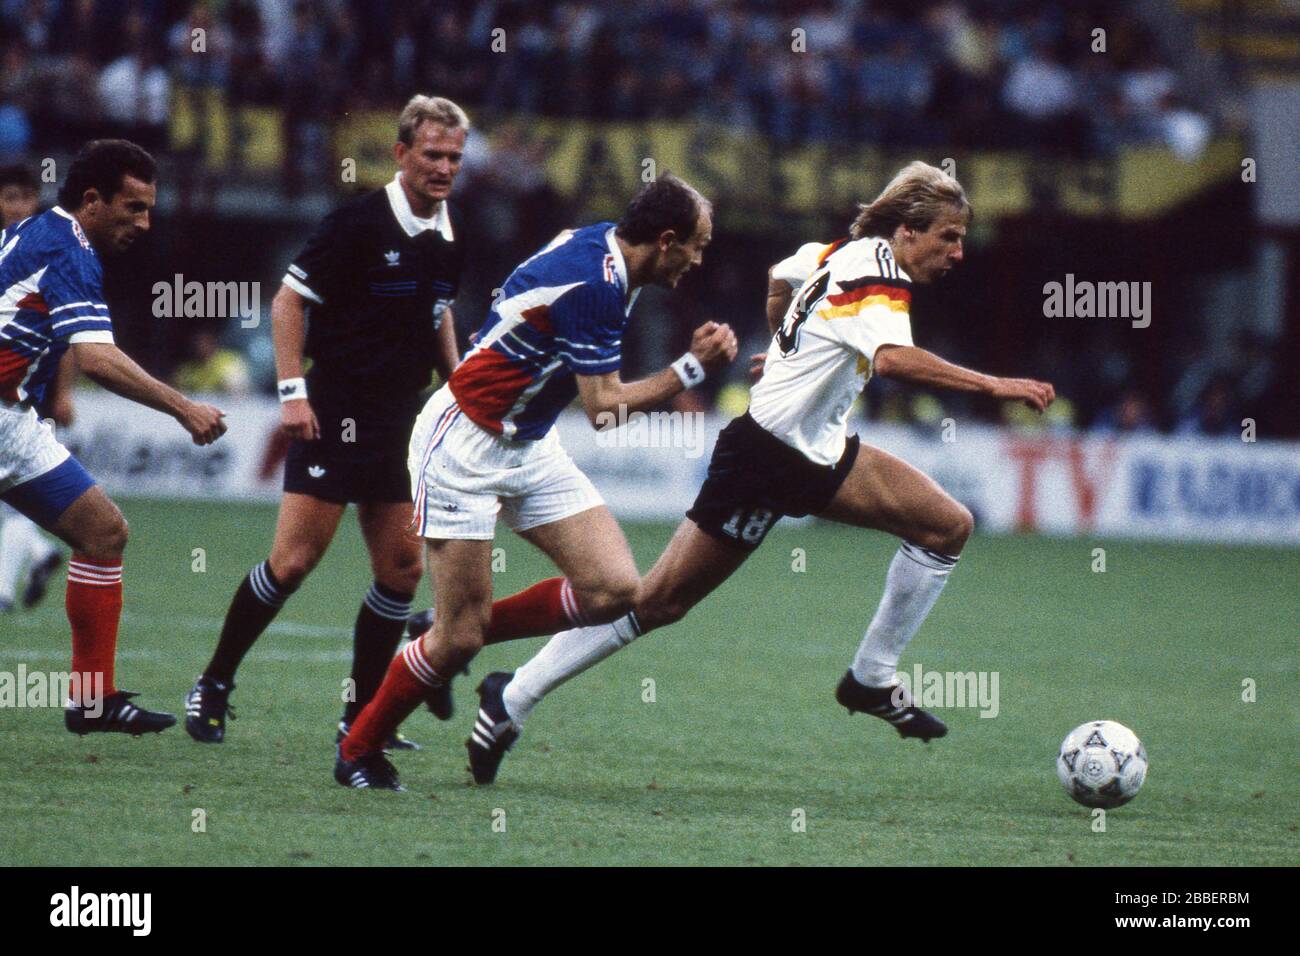 Juergen KLINSMANN, Germany, right, Predrag SPASIC (Yugoslavia) is pursued, duels, action, Germany GER BRD - Yugoslavia YUG 4: 1 (2: 0), preliminary round, final round 1st matchday, group D, 06/19/1990 in Milan, Soccer World Cup 1990 in Italy, 1989, | usage worldwide Stock Photo